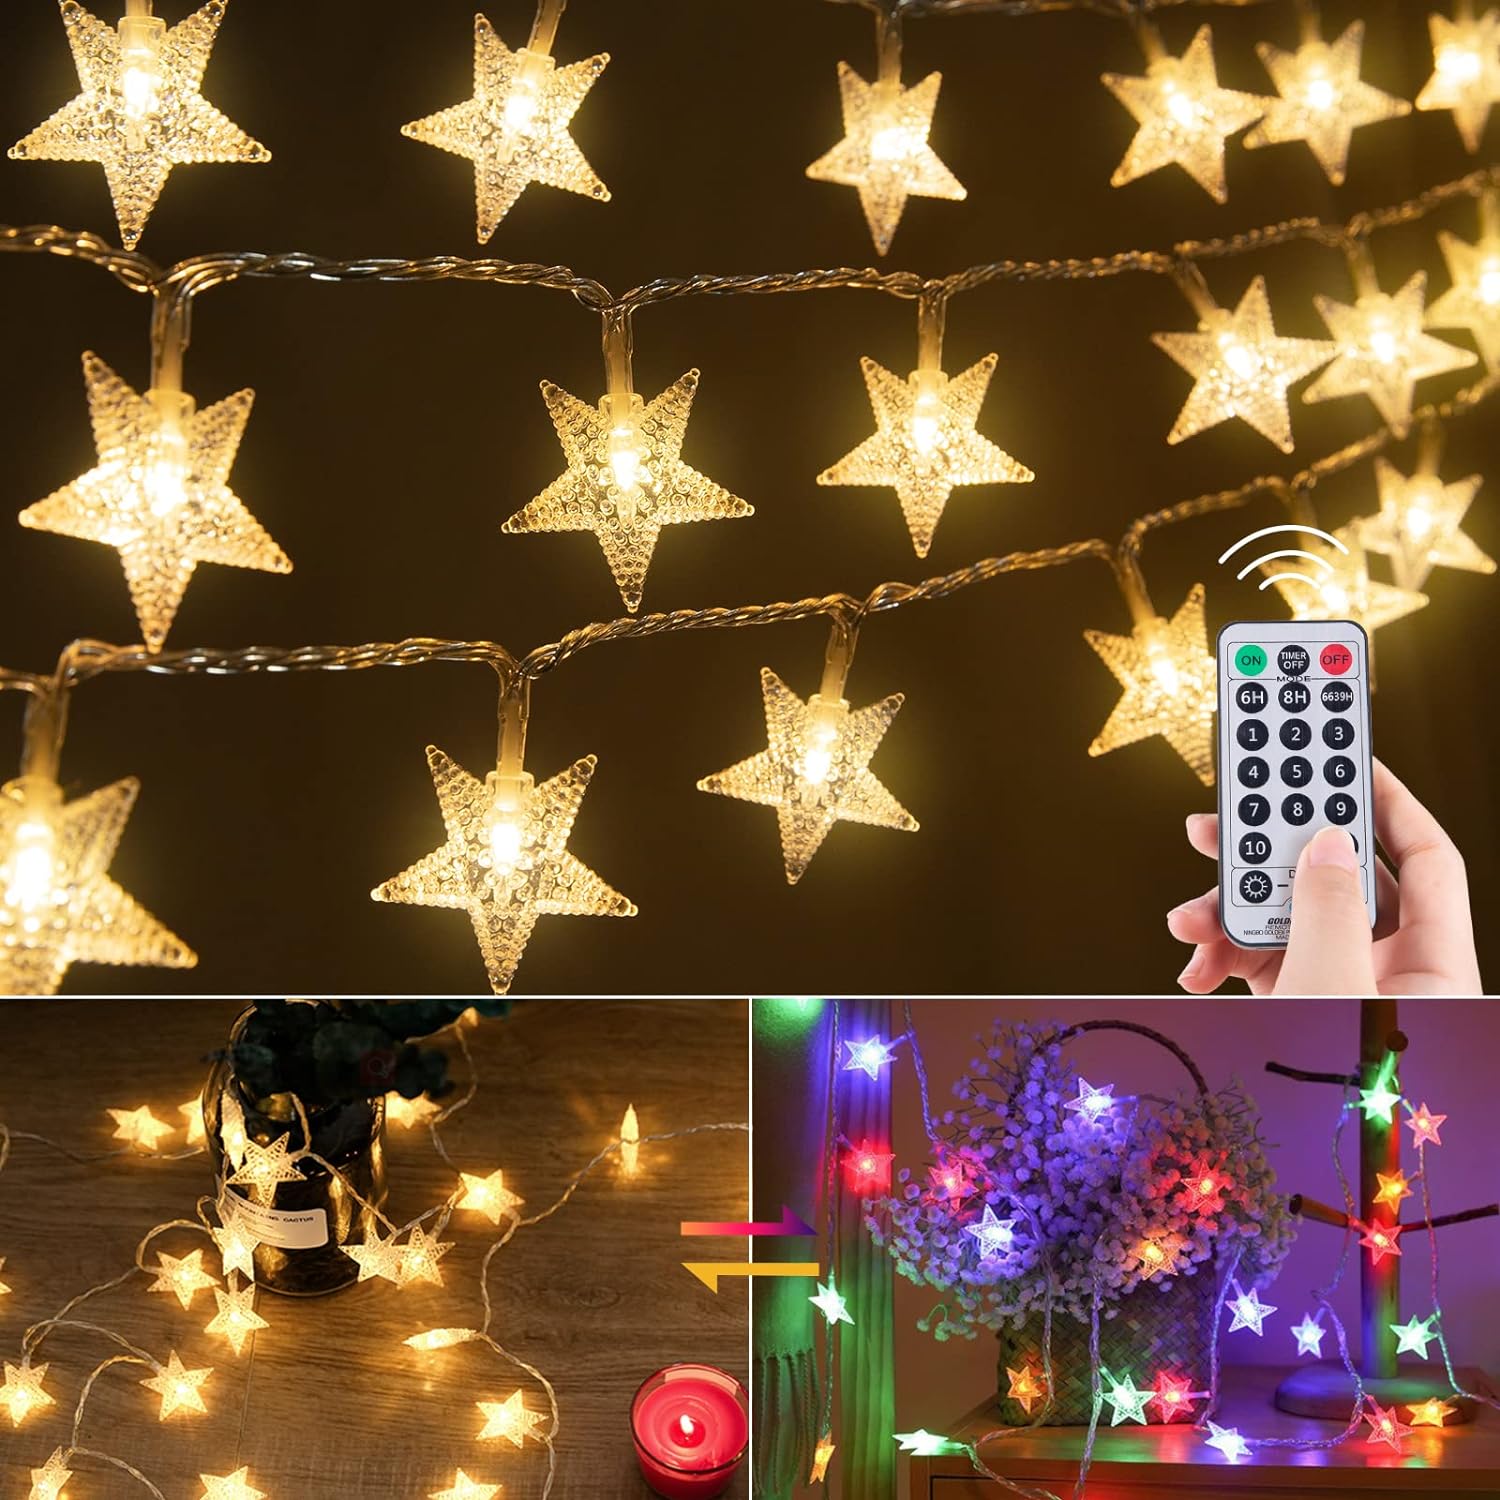 Minetom Star String Lights Plug in - 33 ft 100 LED Star Fairy String Lights with Remote and Timer, Waterproof for Bedroom Tent Loft Bed Shelf Porch Patio Garden Party Dcor, Warm White + Multicolor